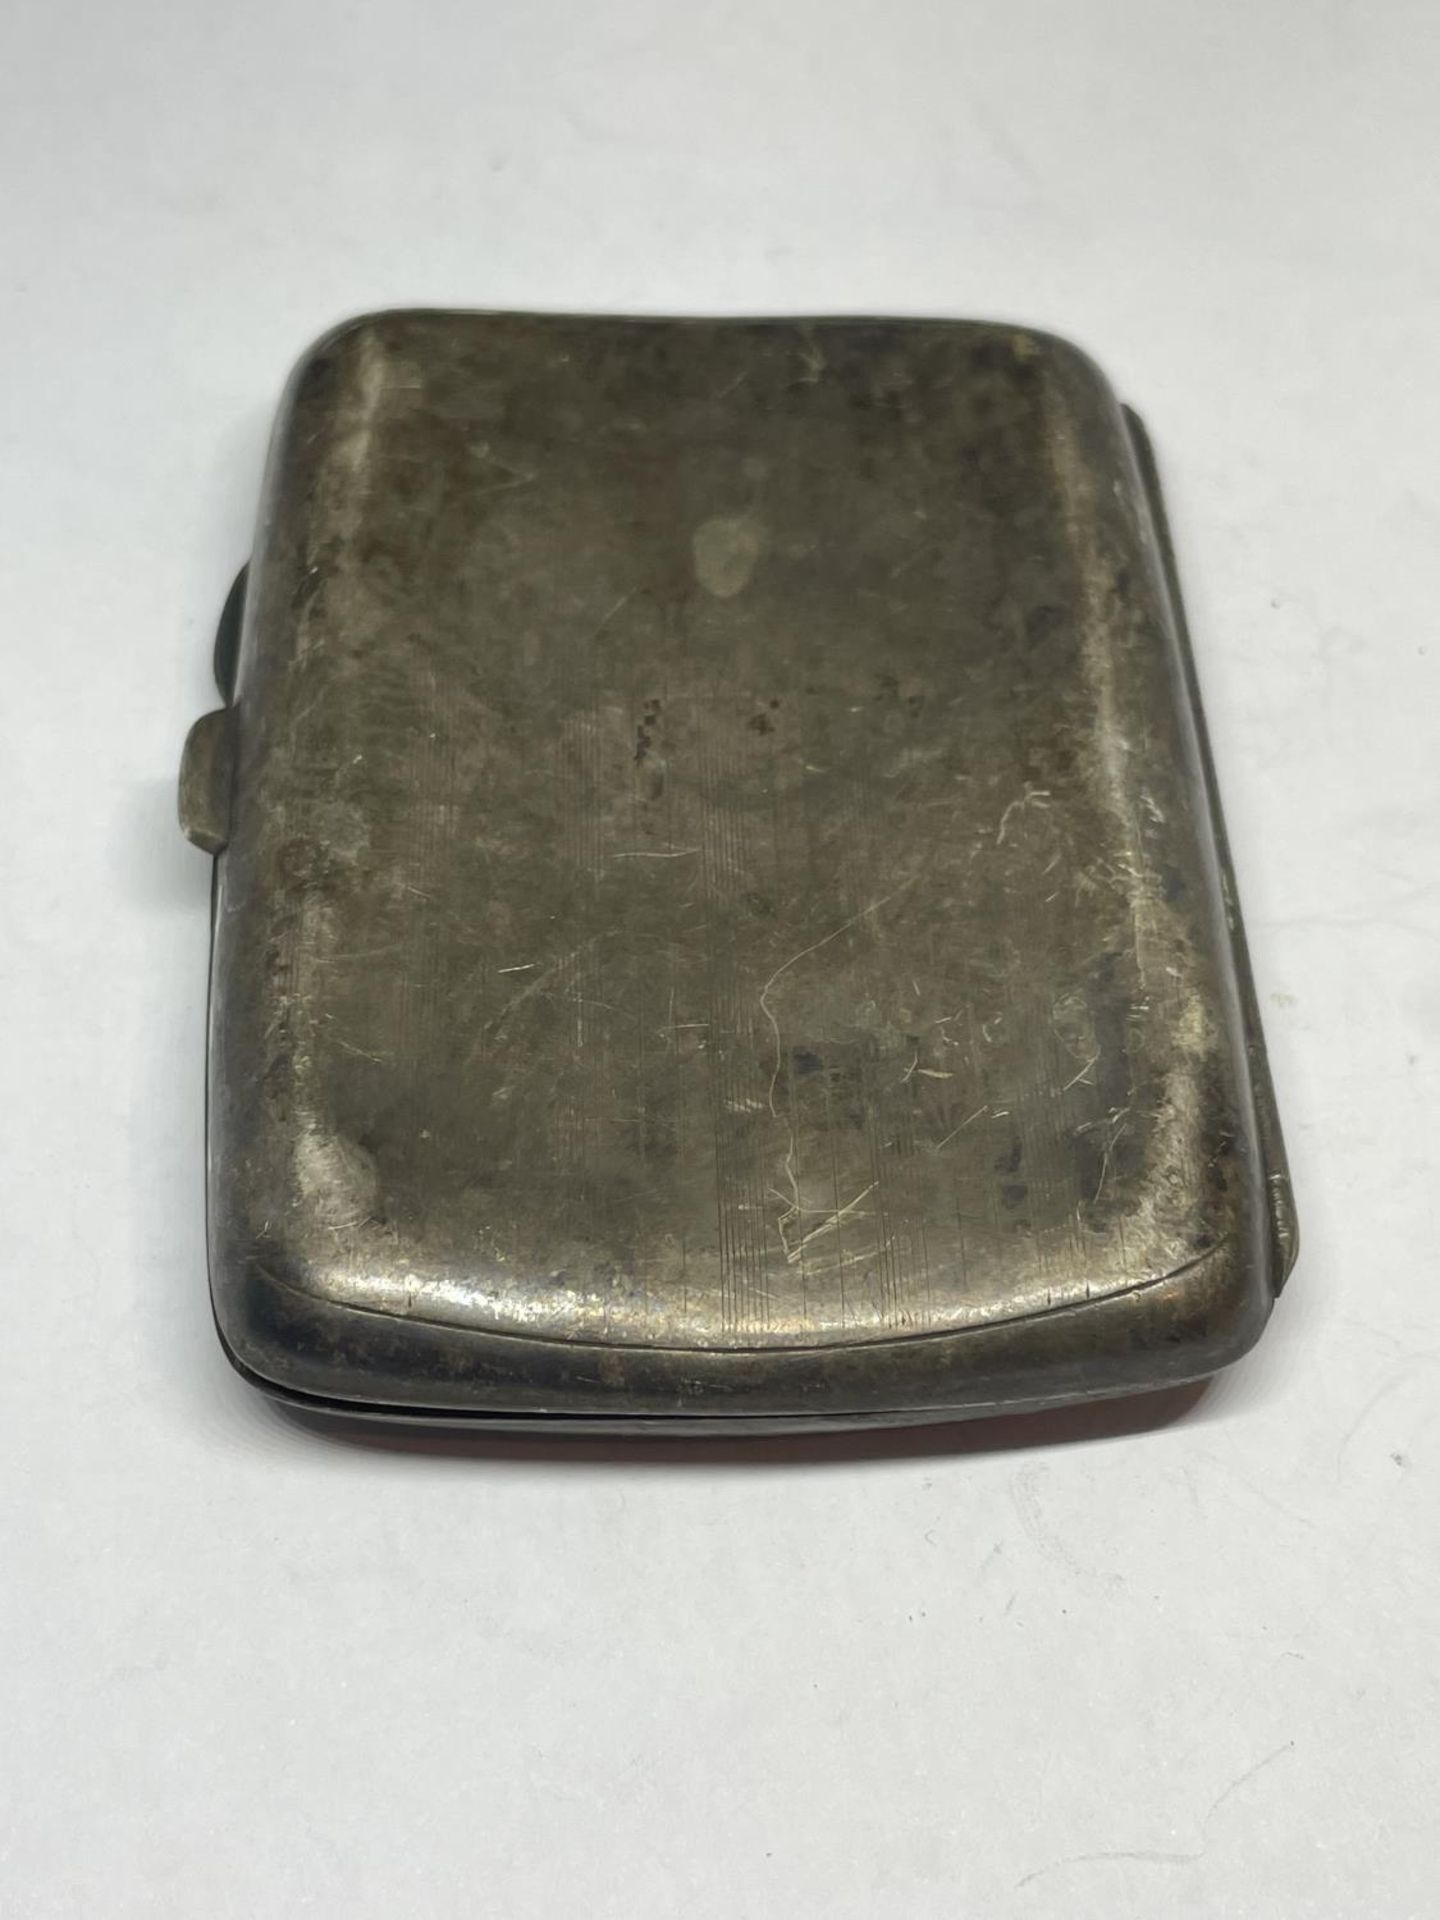 A HALLMARKED BIRMINGHAM SILVER CIGARETTE CASE GROSS WEIGHT 80.8 GRAMS - Image 2 of 4